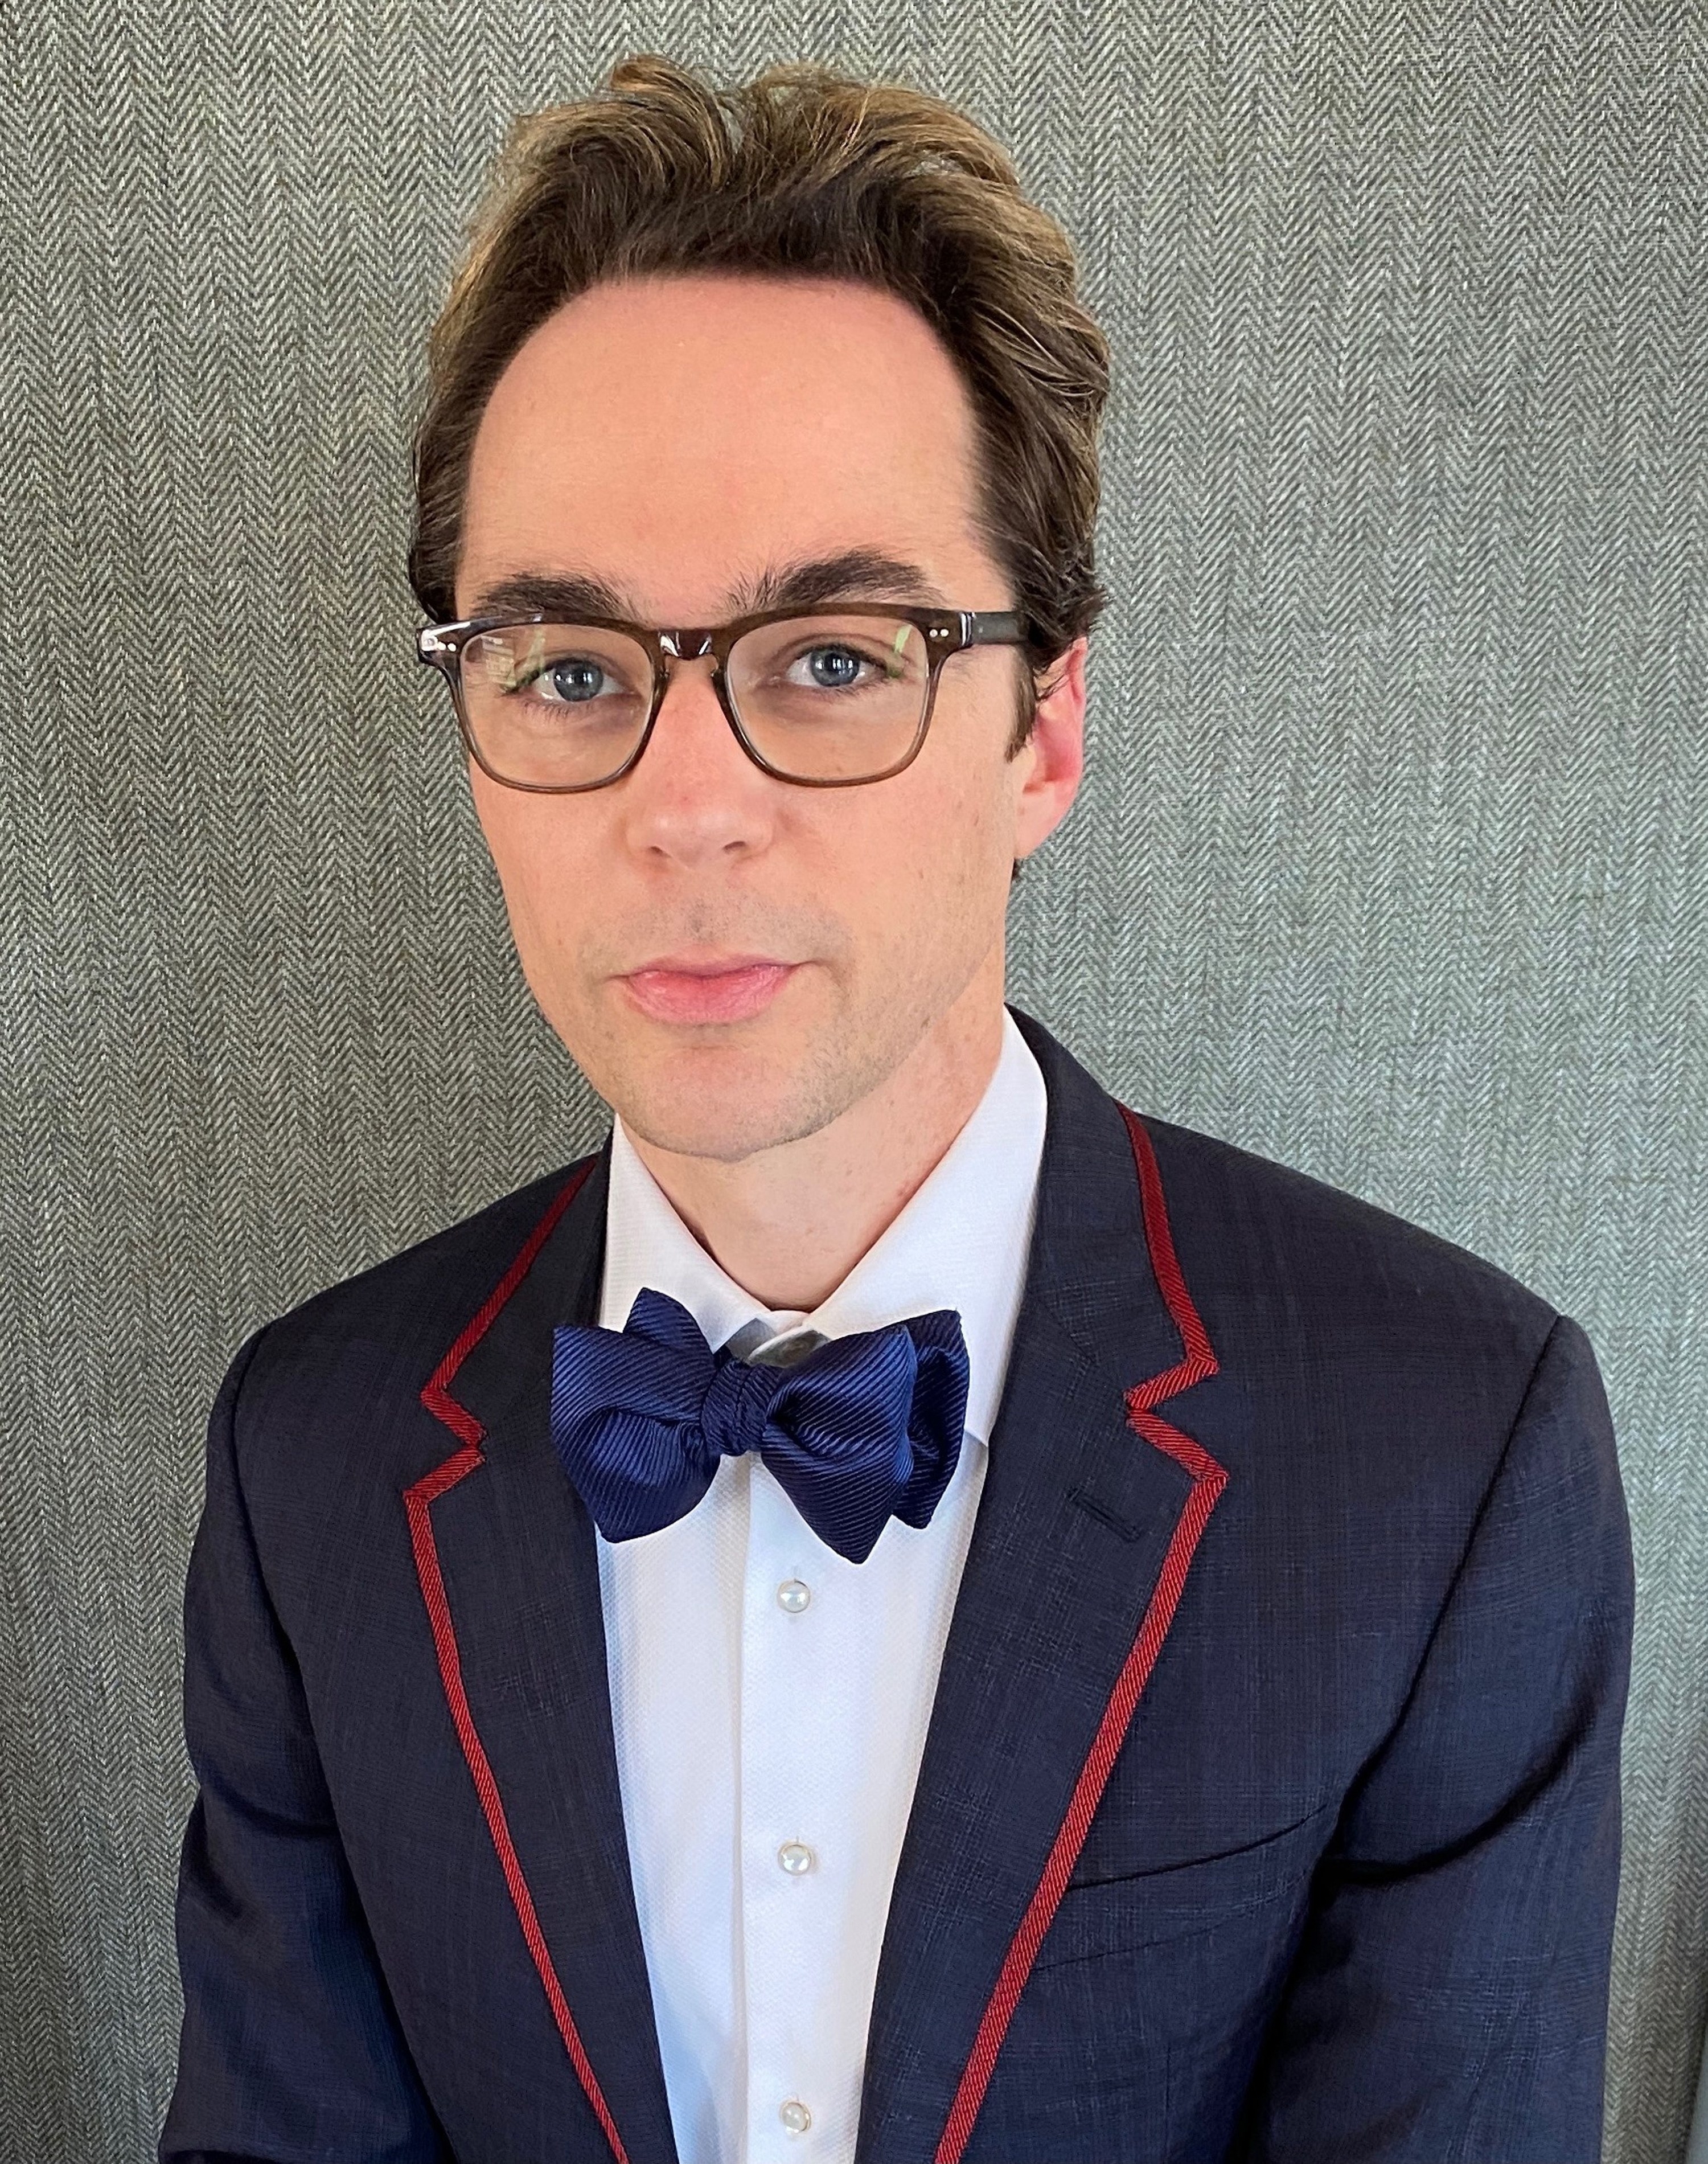 Jim wearing glasses and a bow tie